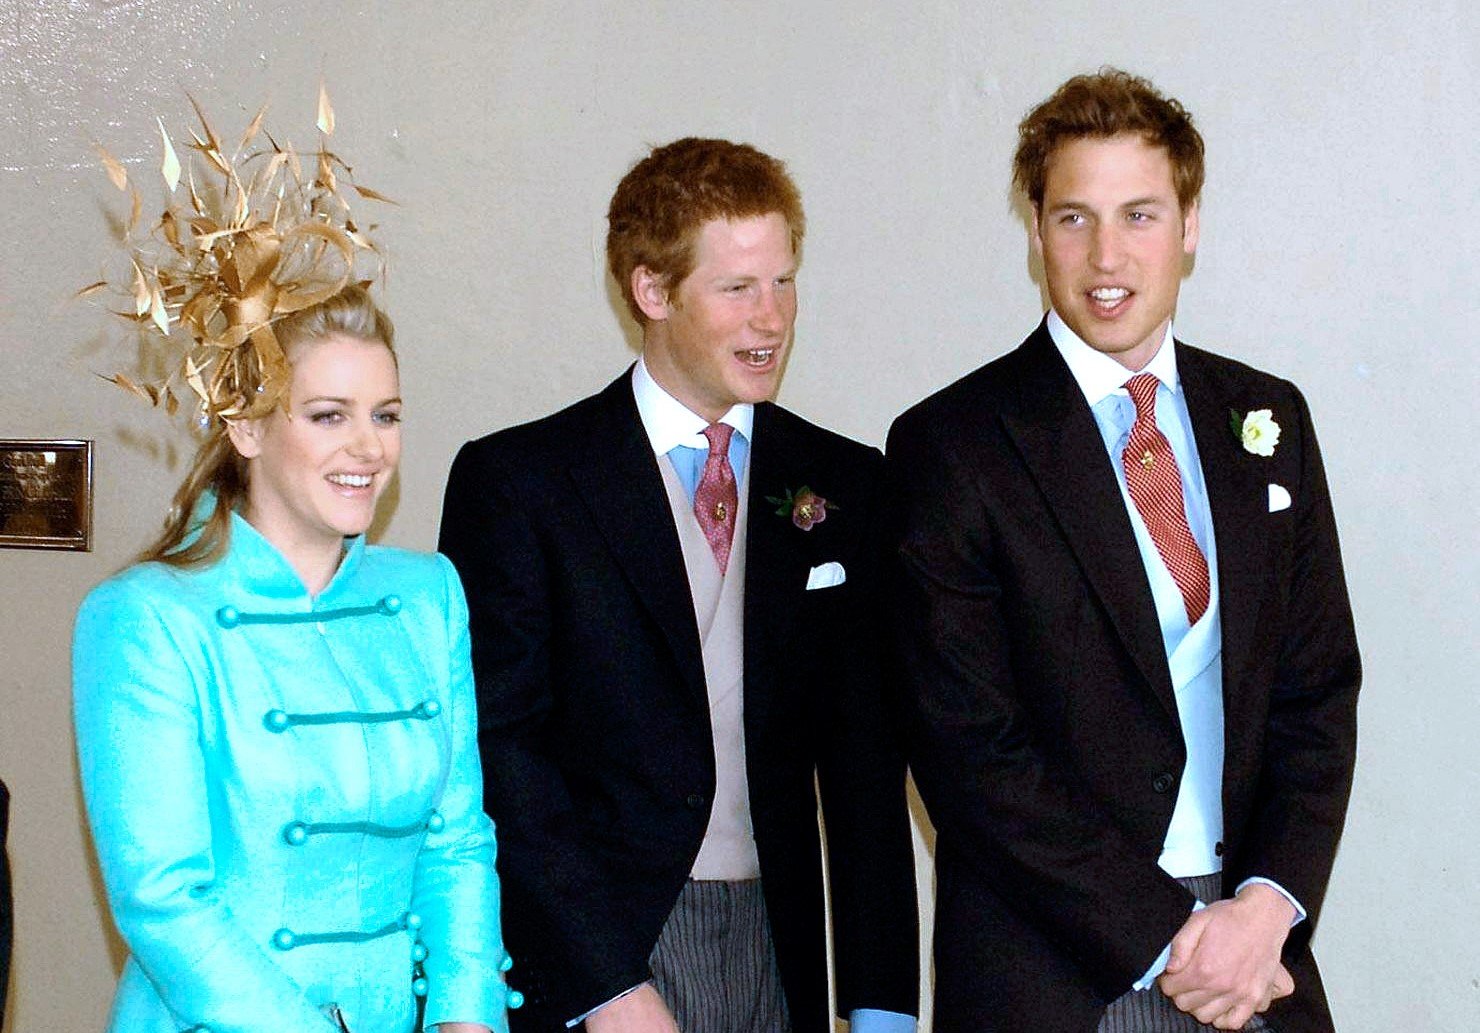 (L-R) Laura Lopes (nee Parker Bowles), Prince Harry, and Prince William 